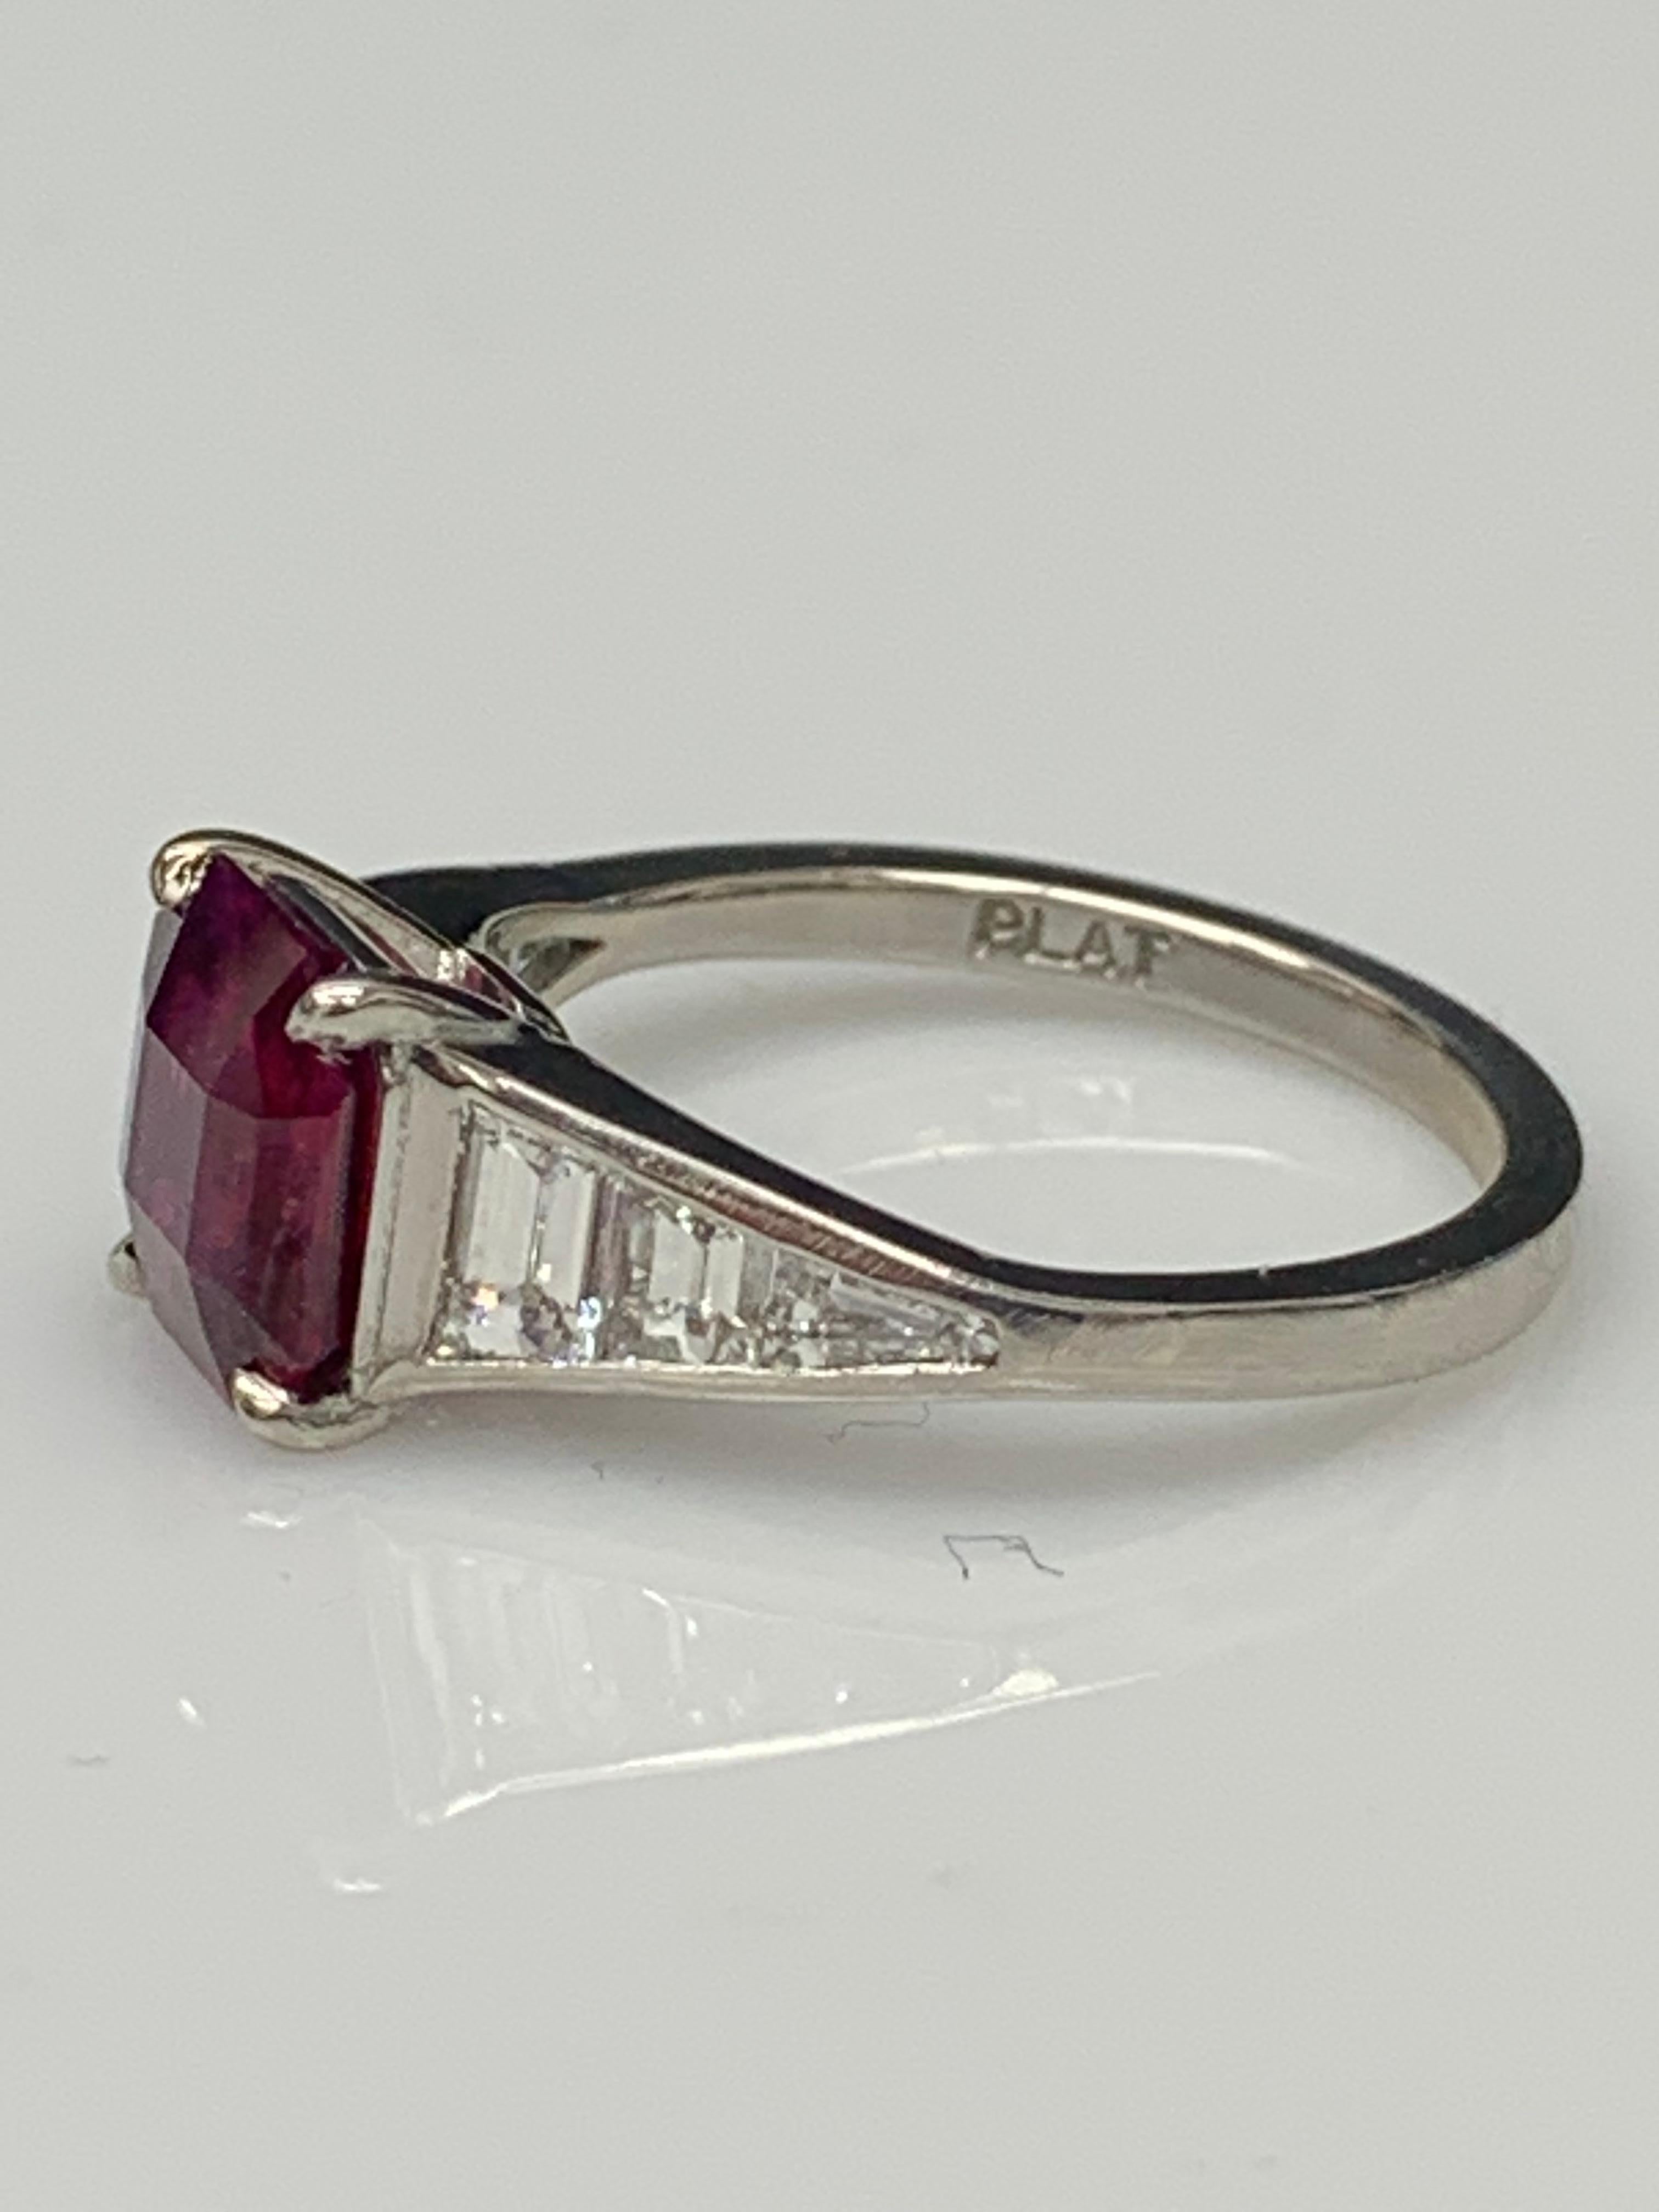 2.11 Carat Emerald Cut Ruby and Diamond Engagement Ring in Platinum For Sale 1